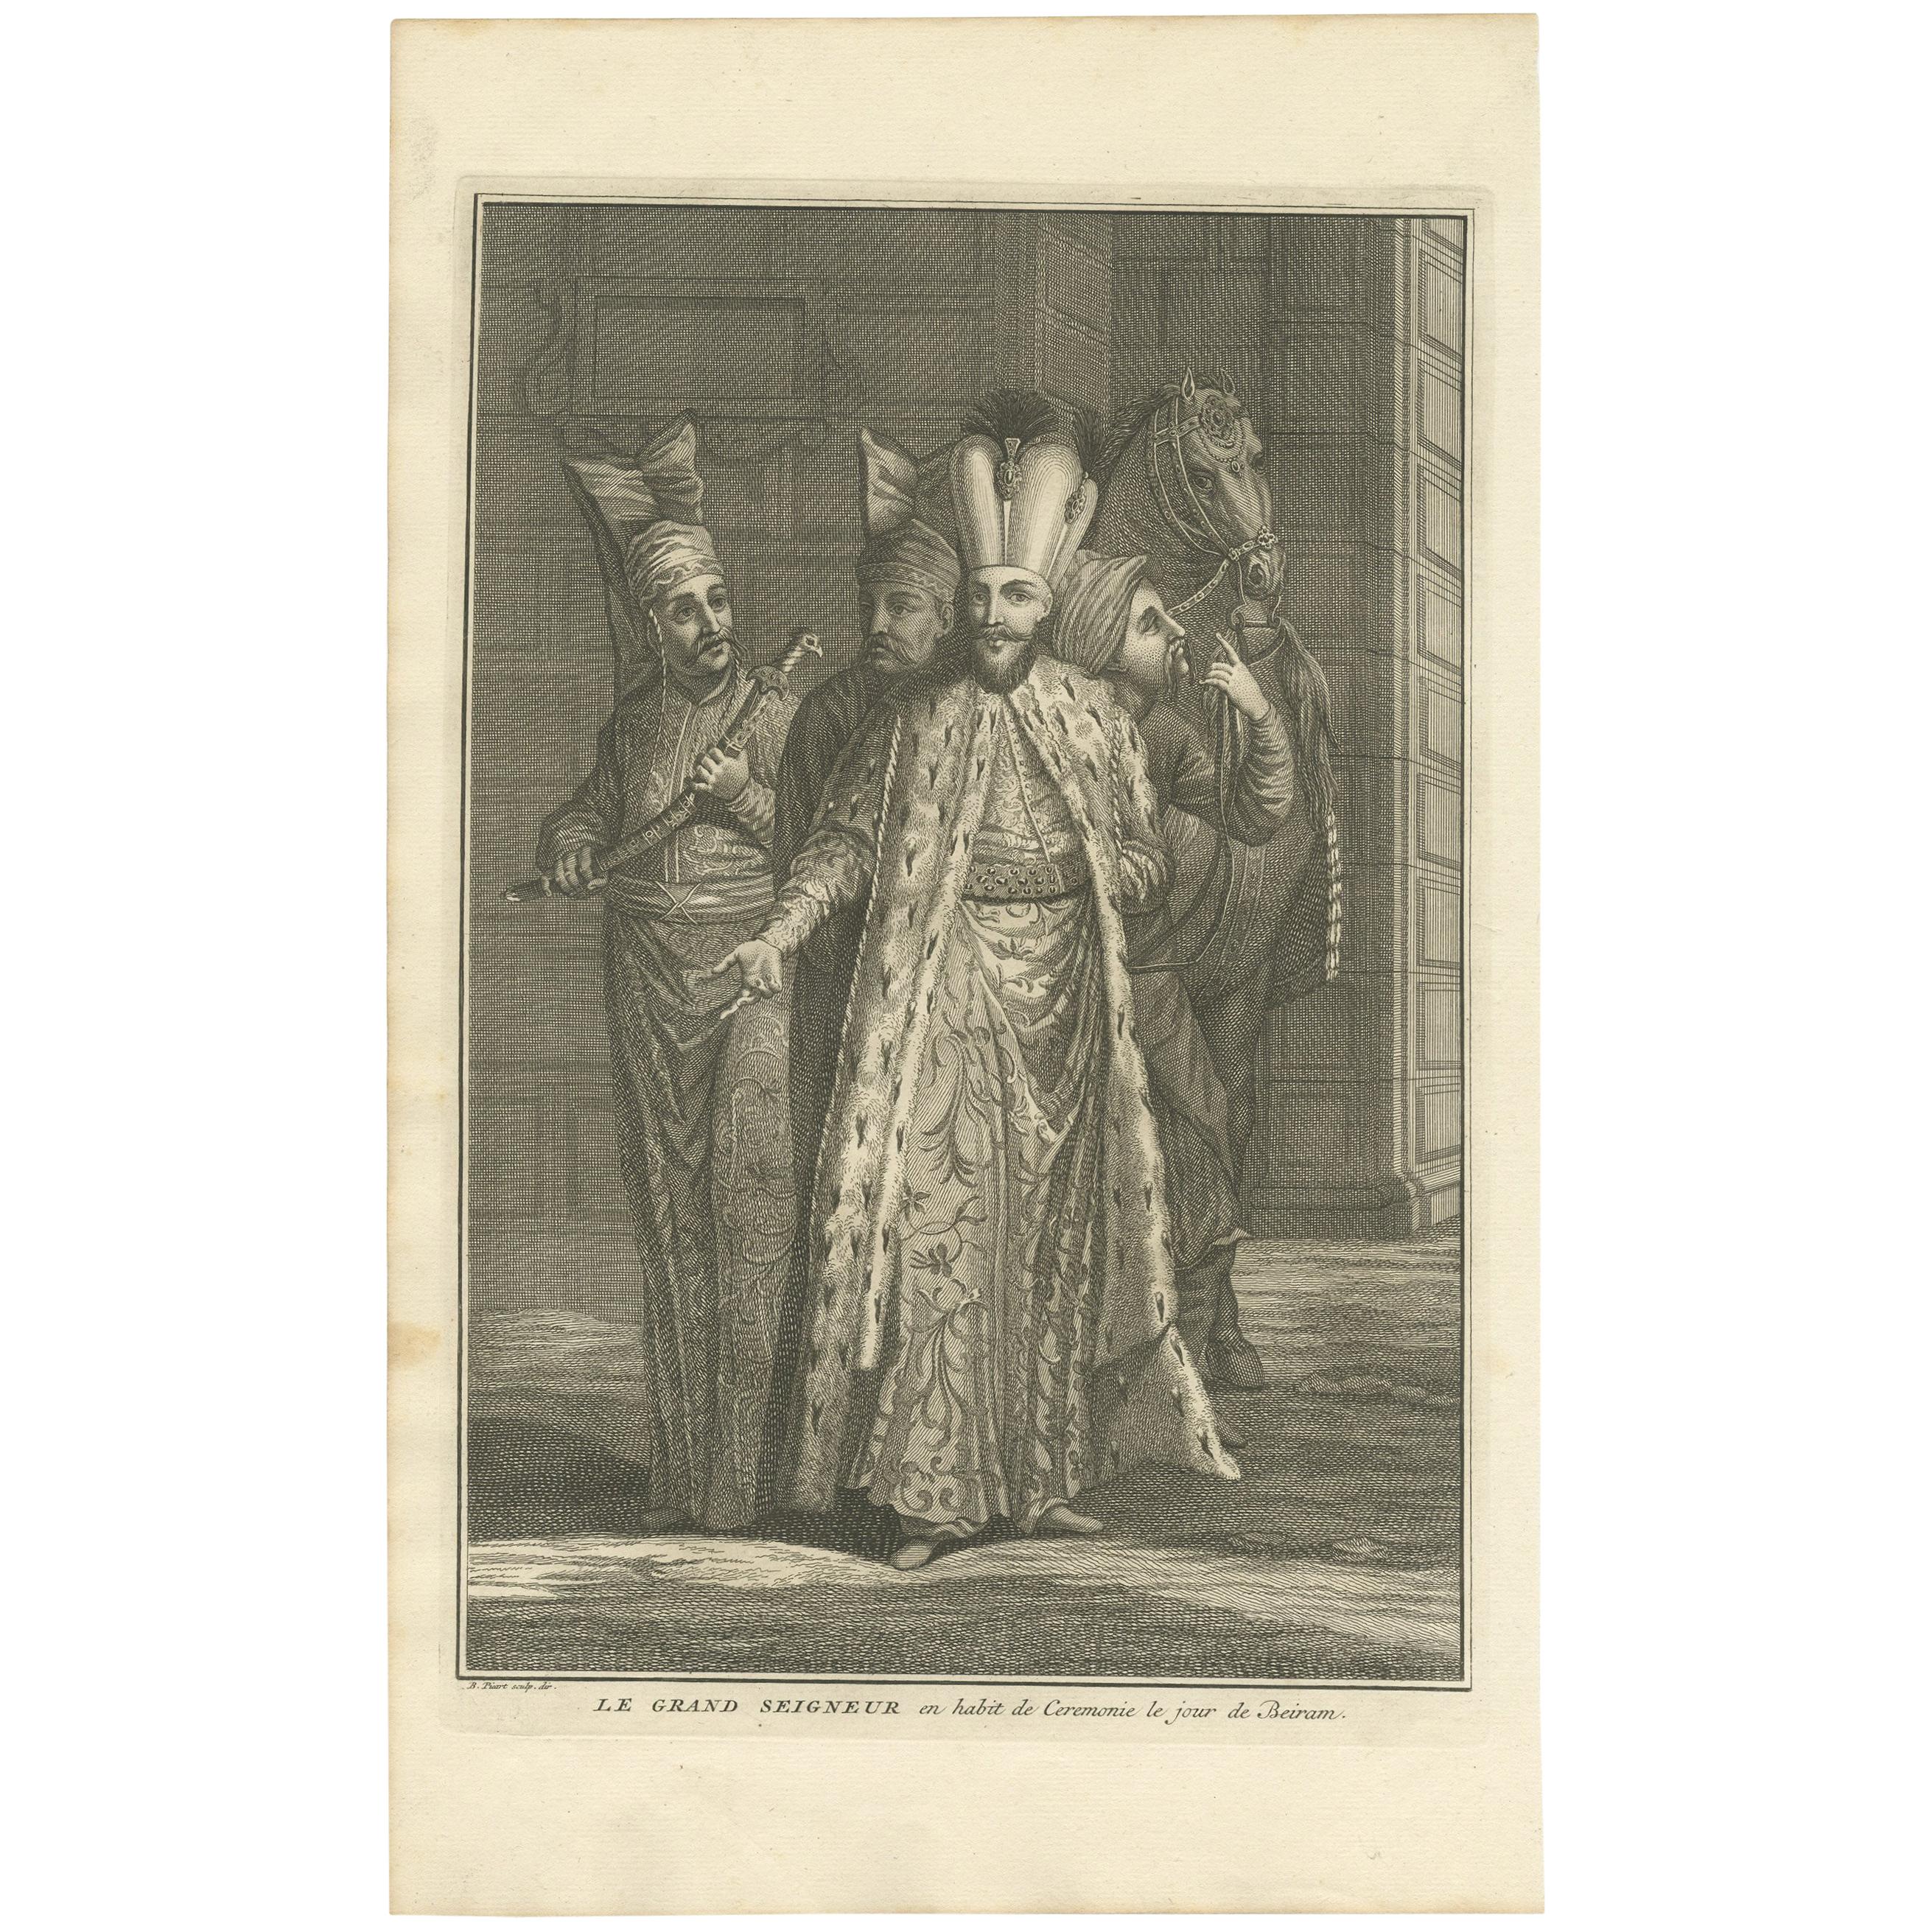 Antique Portrait of the Great Lord on the Day of Bayram by Picart, circa 1725